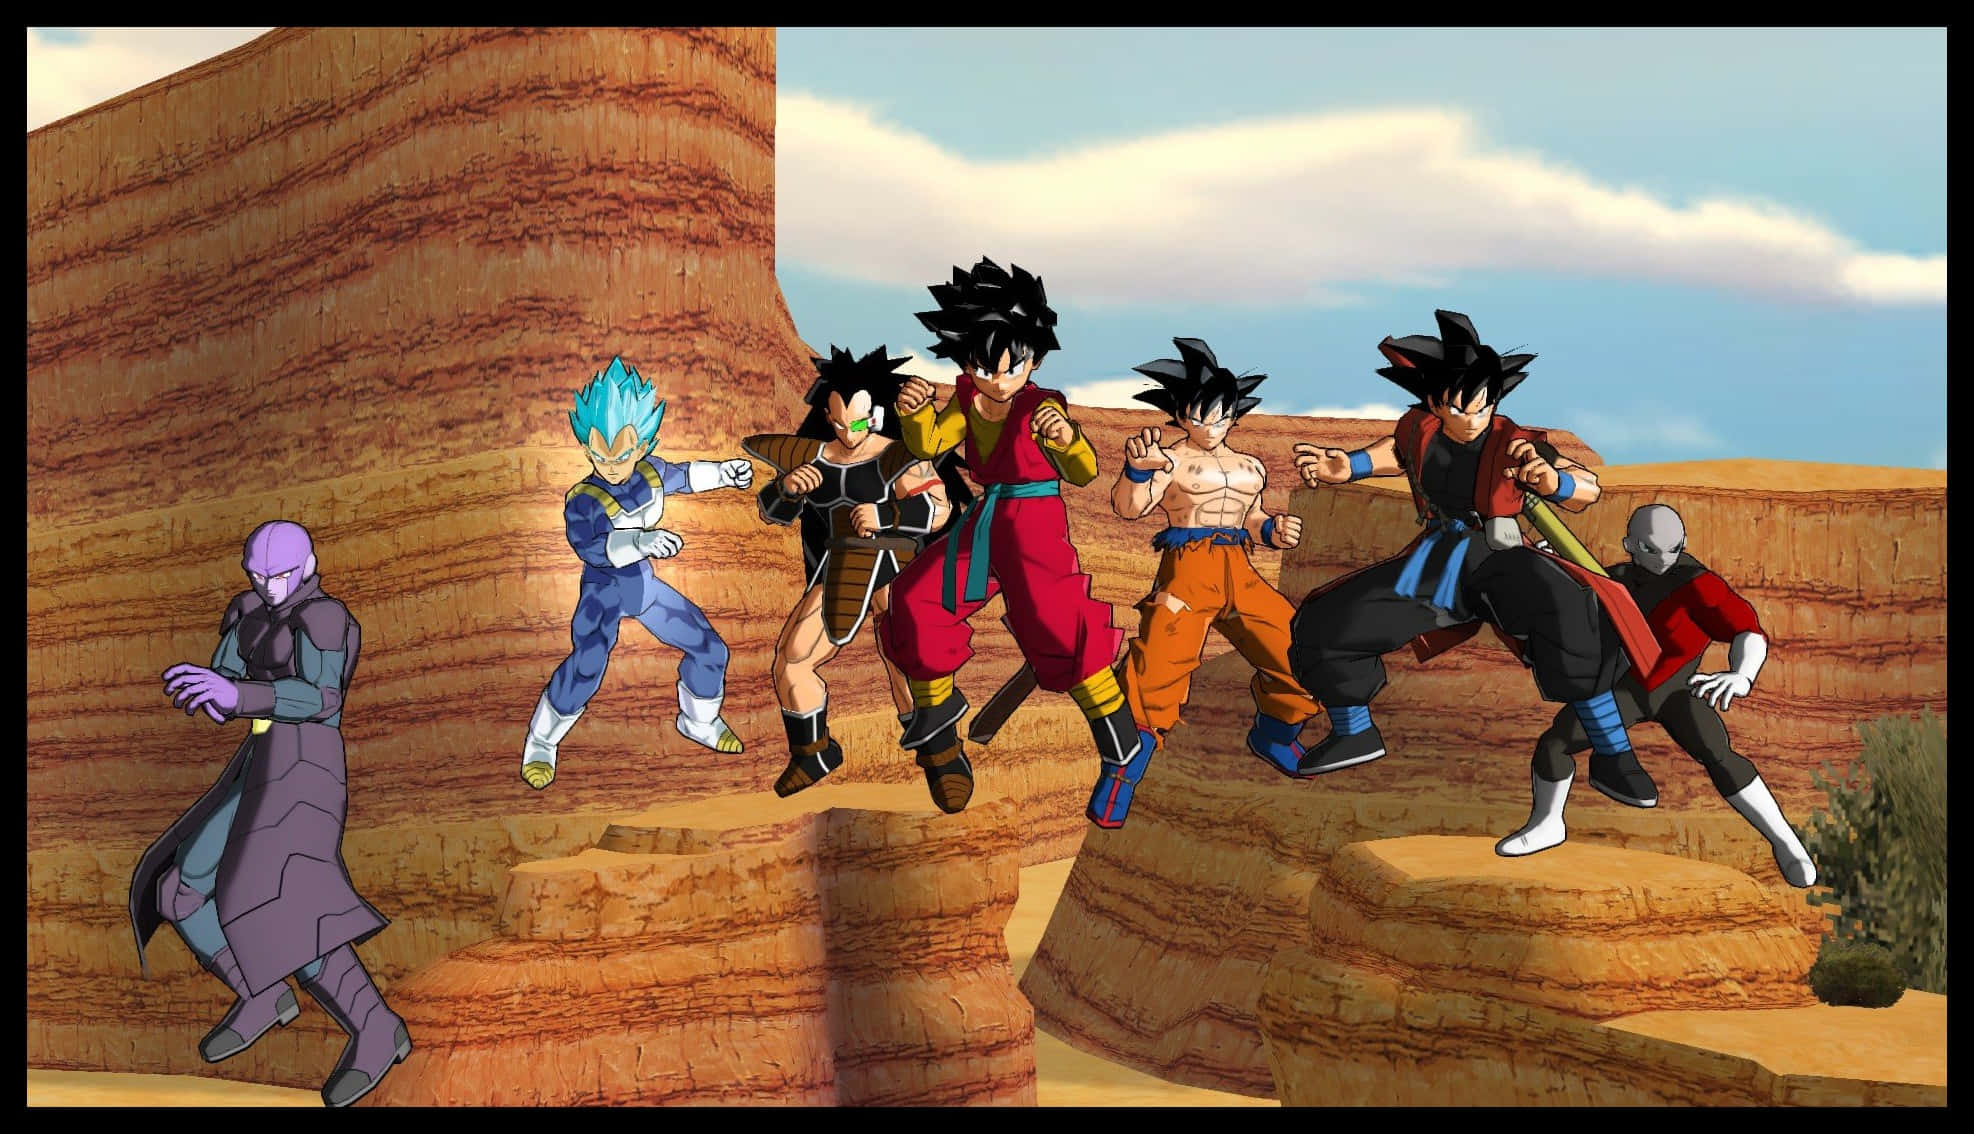 Charge up your power levels with Dragon Ball Super Games Wallpaper